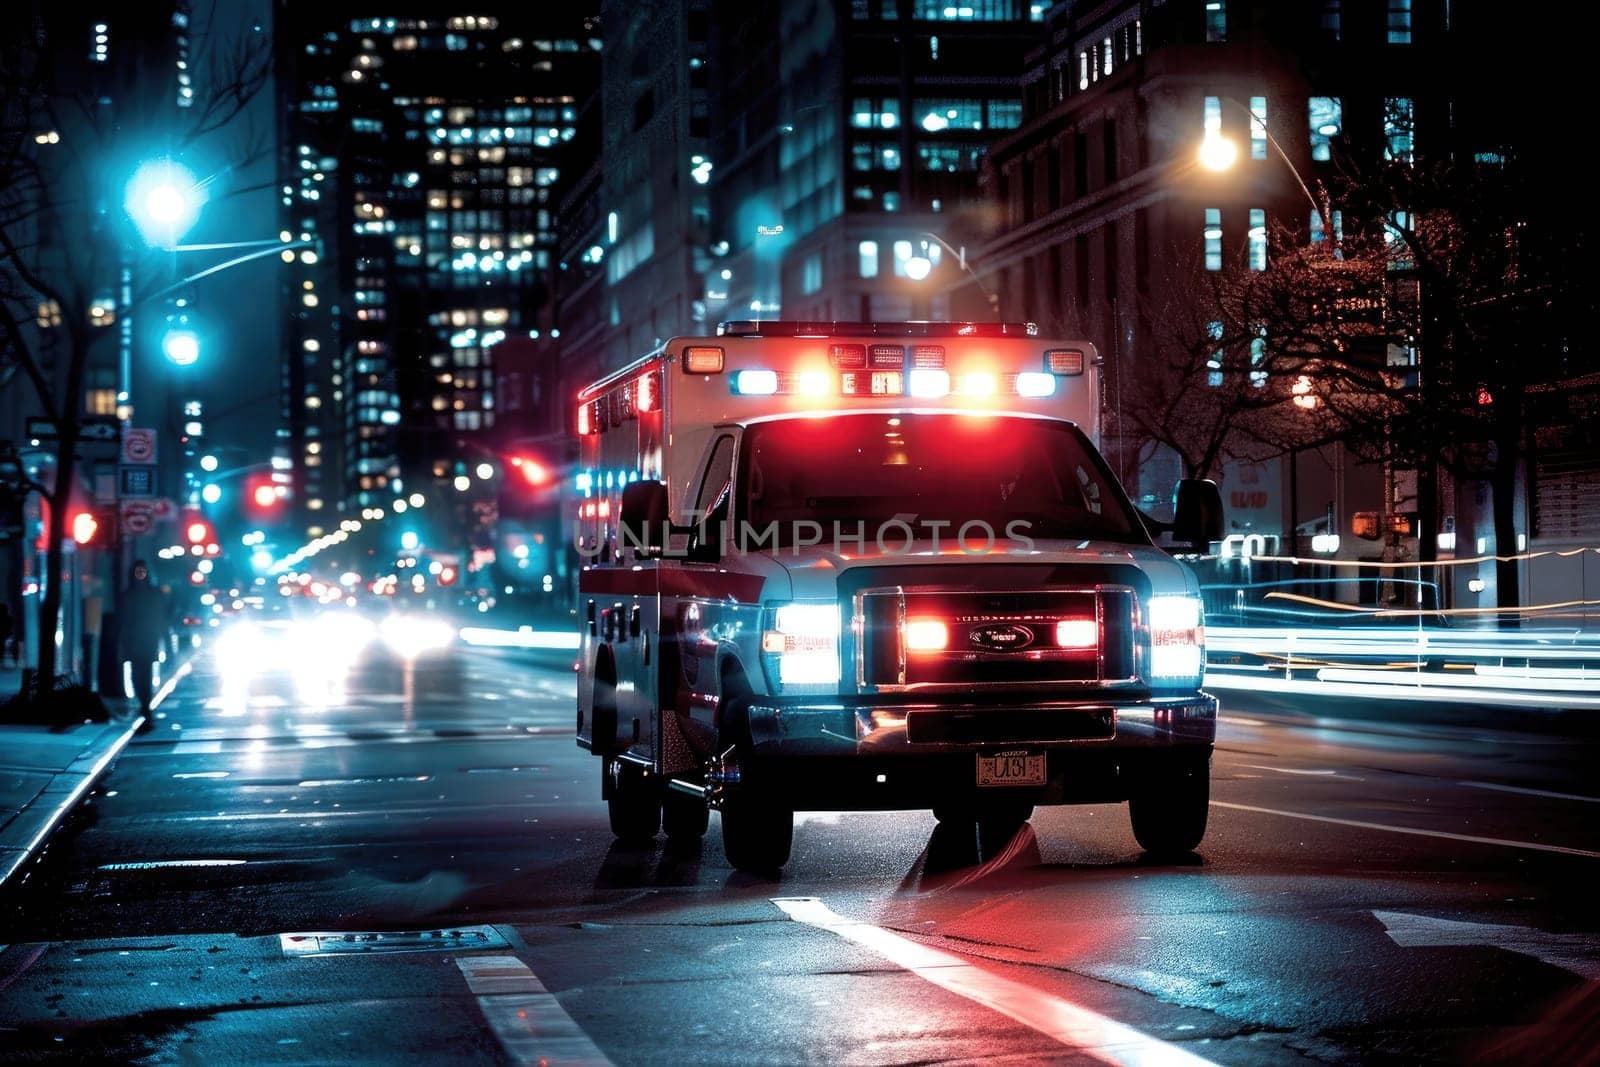 An ambulance with flashing lights and sirens races down a city street at night. by Chawagen